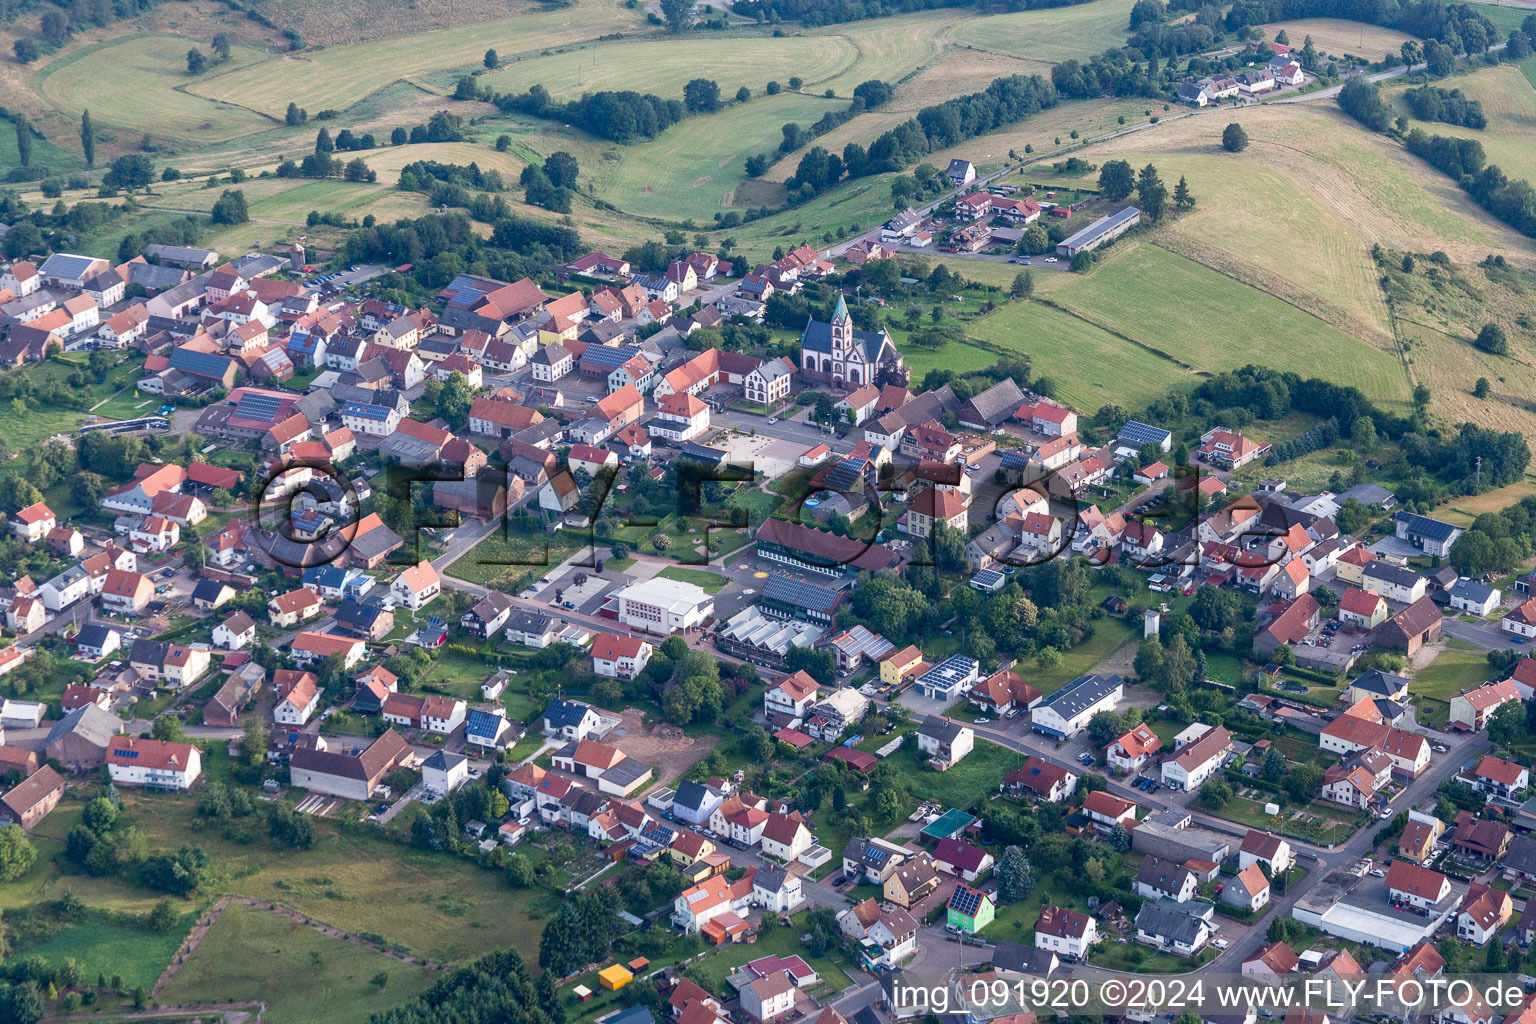 Village view in Martinshoehe in the state Rhineland-Palatinate, Germany